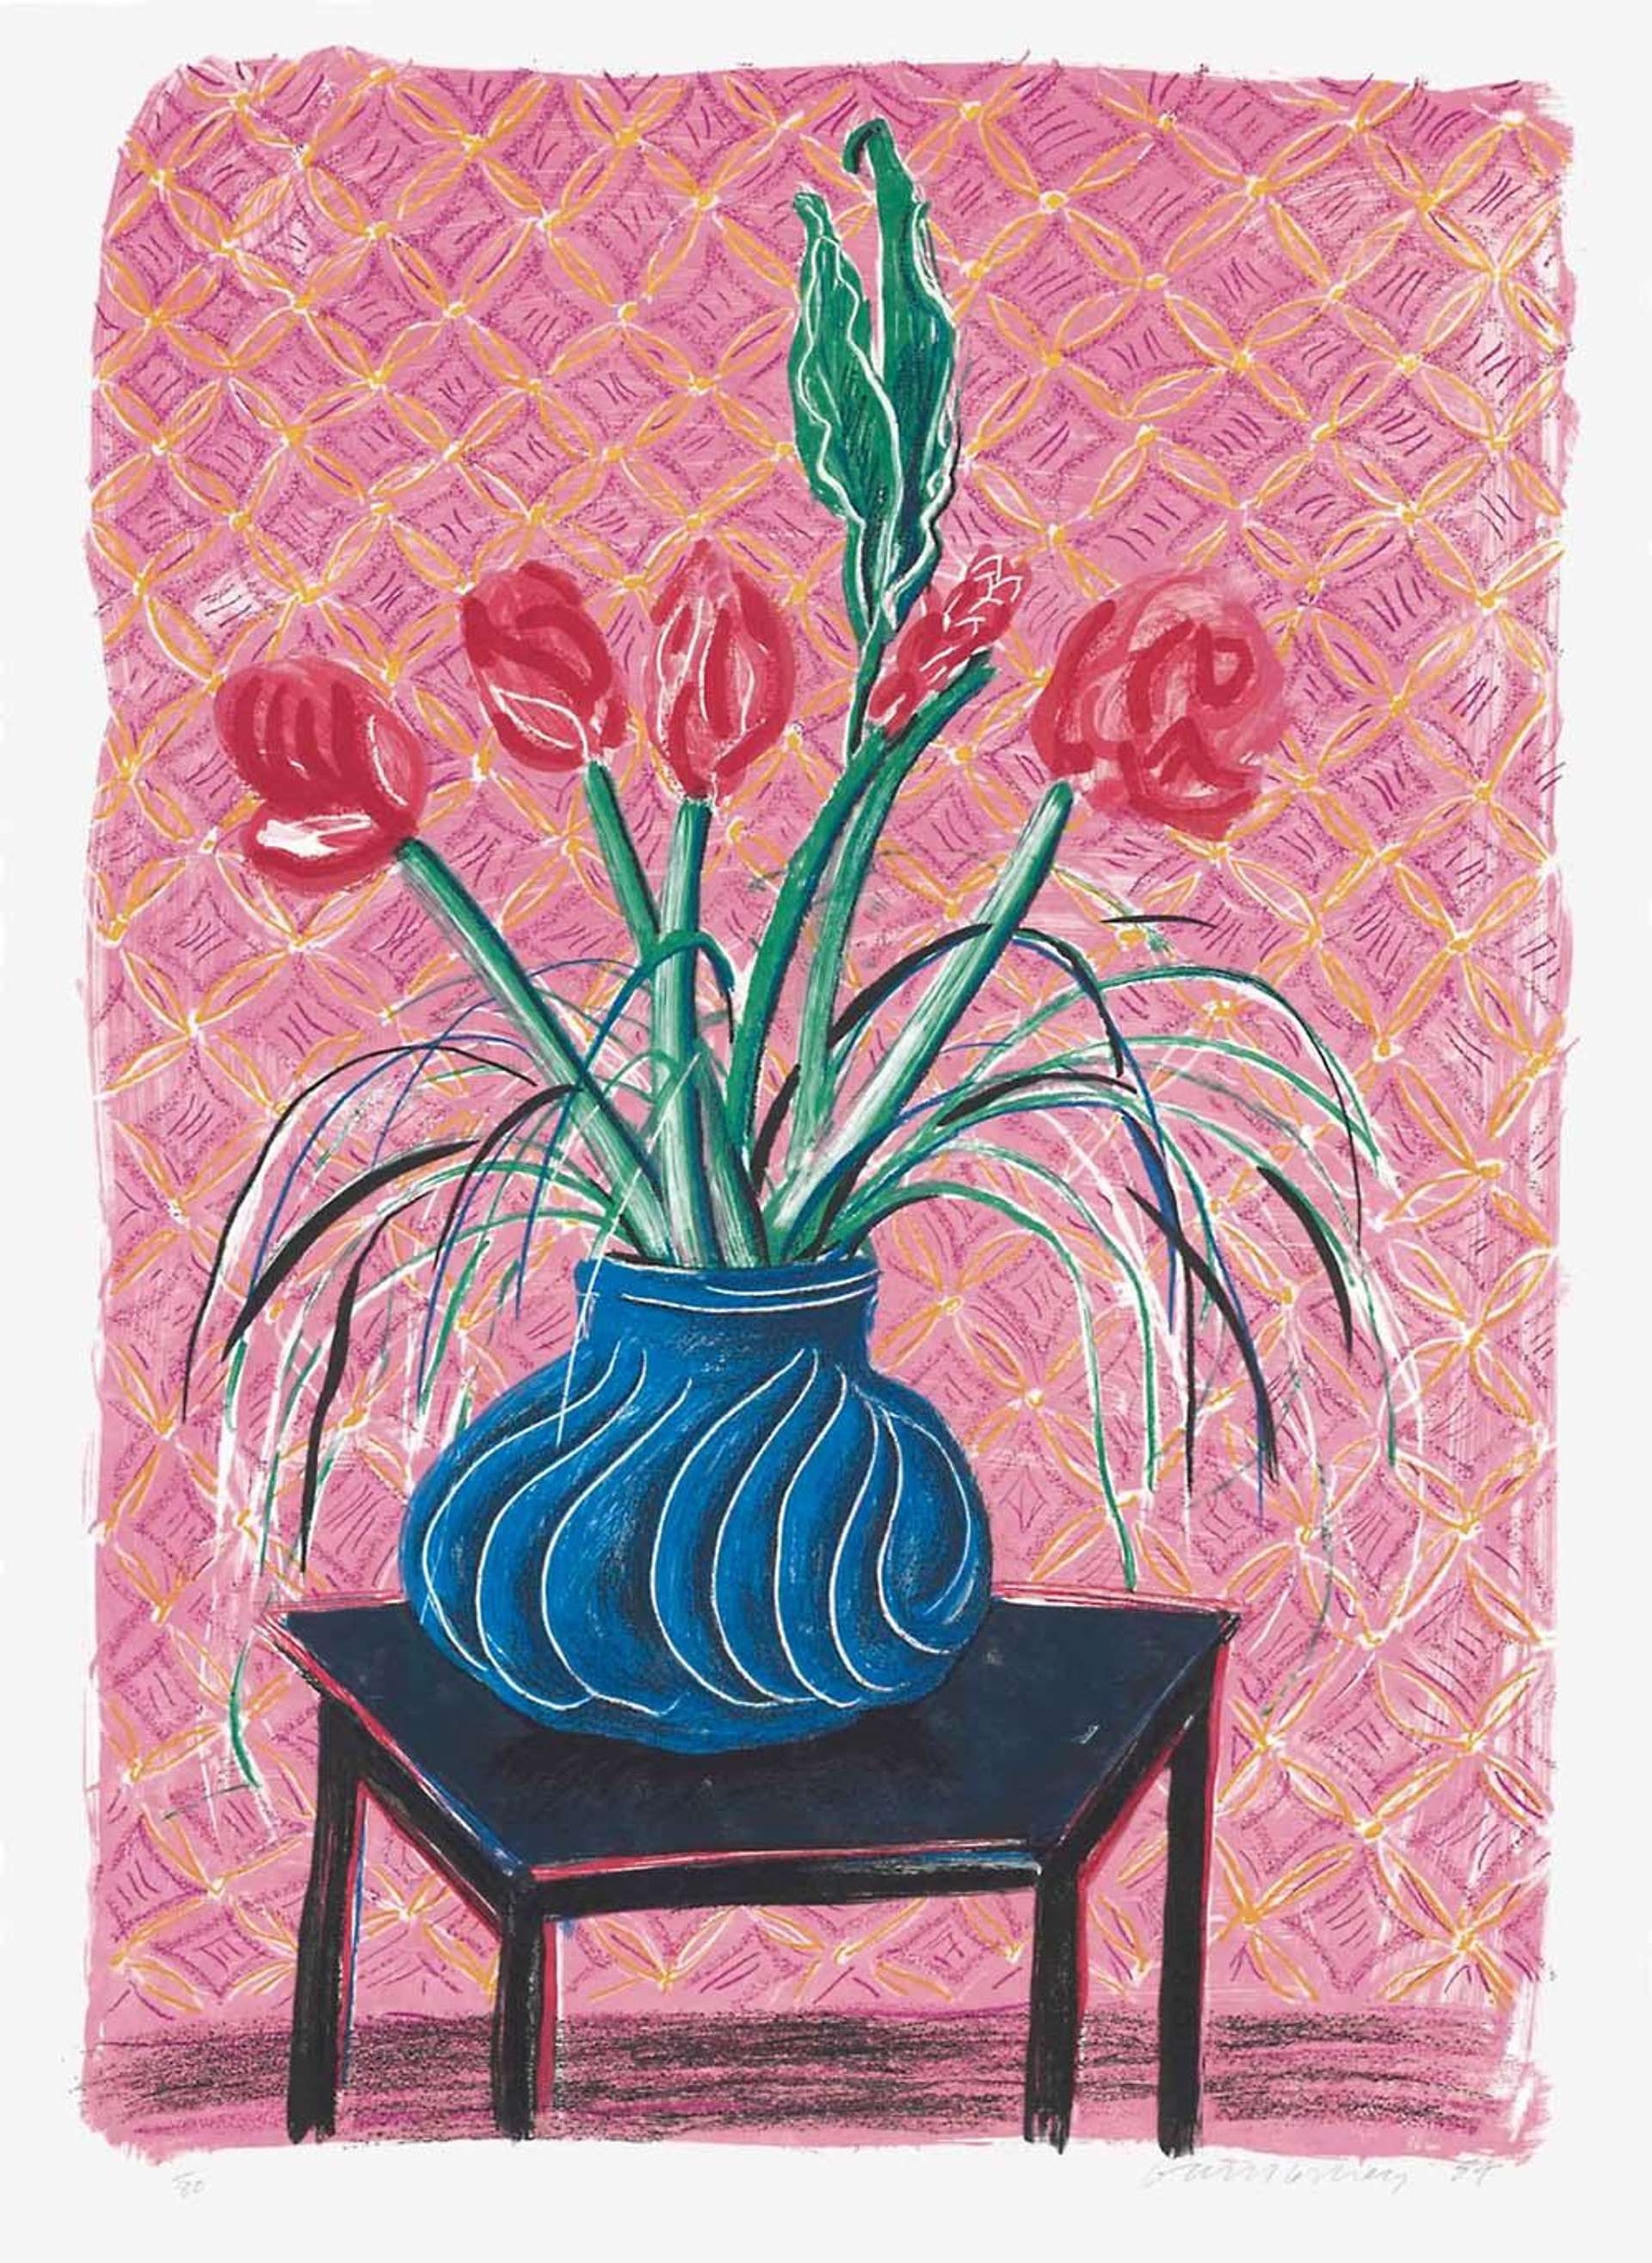 David Hockney's Amaryllis In Vase. A print of five red flowers in a blue vase on a table against pink walls.